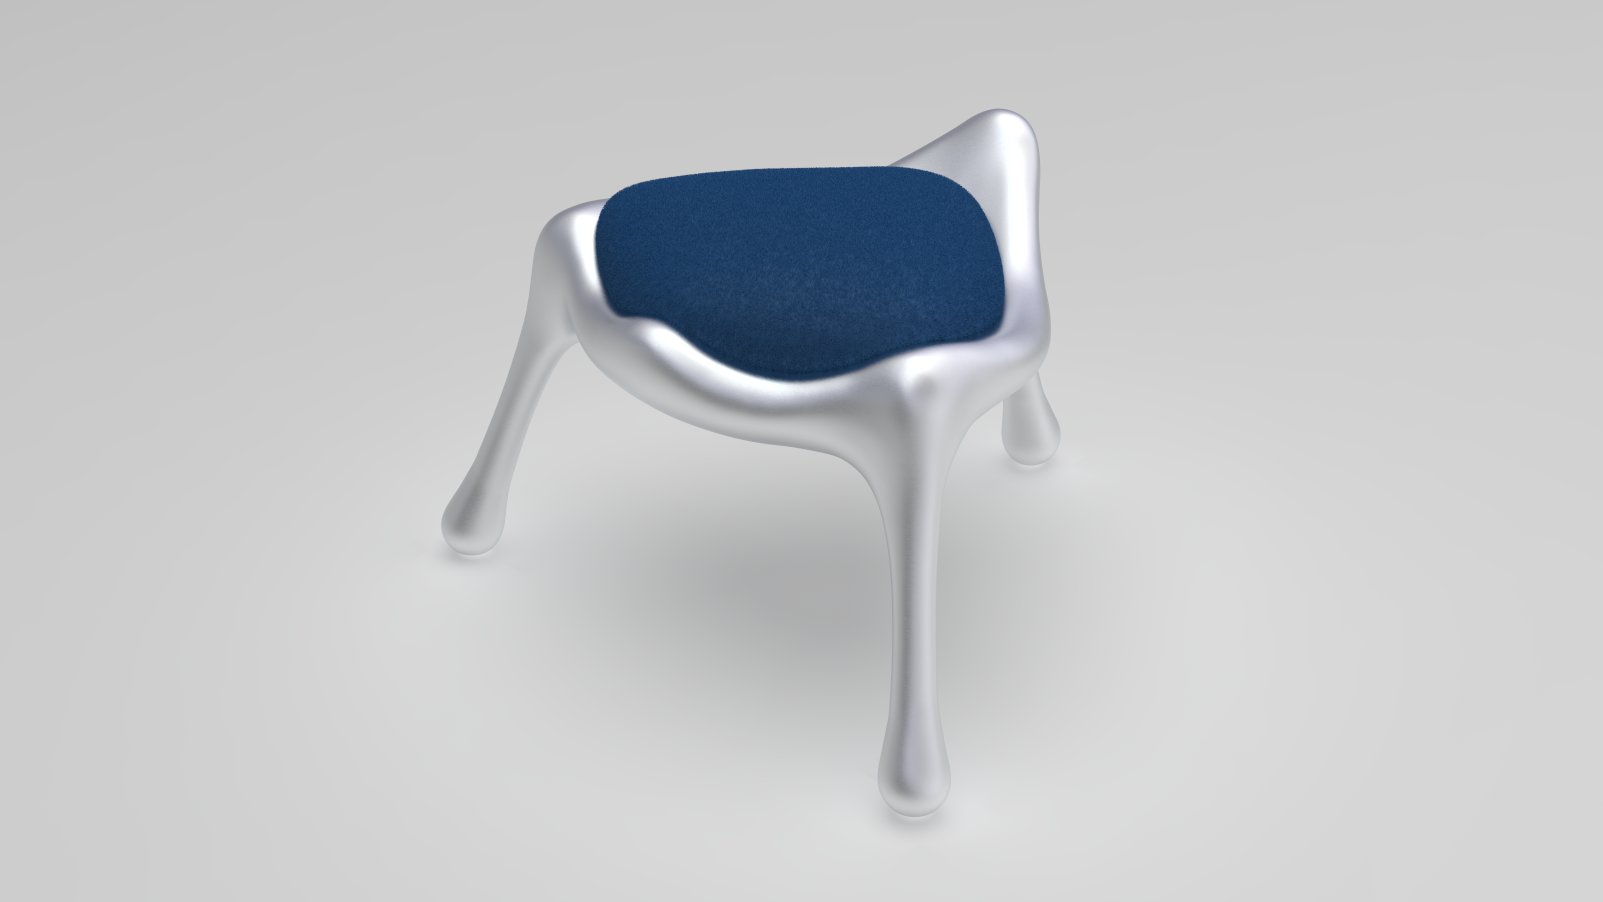 3D rendering of a furniture